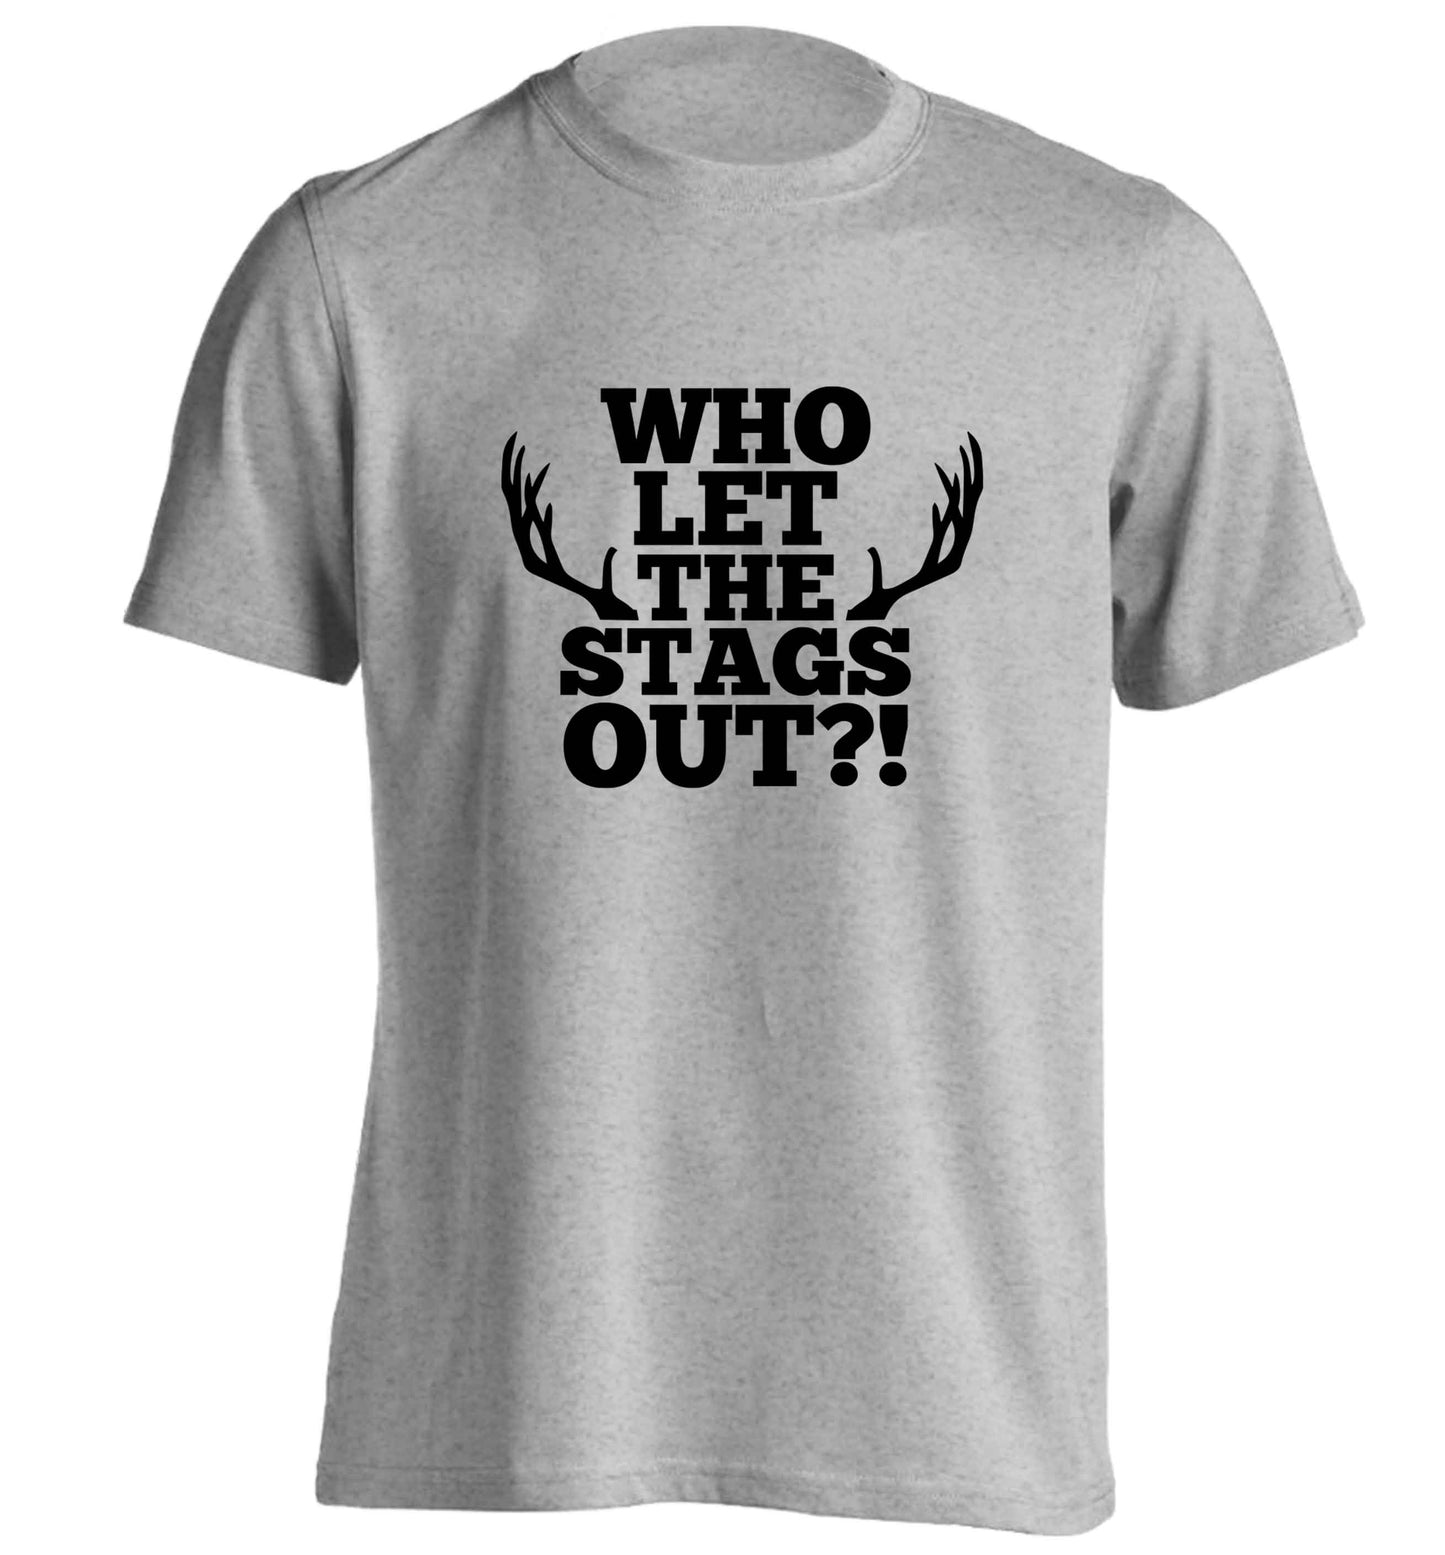 Who let the stags out adults unisex grey Tshirt 2XL